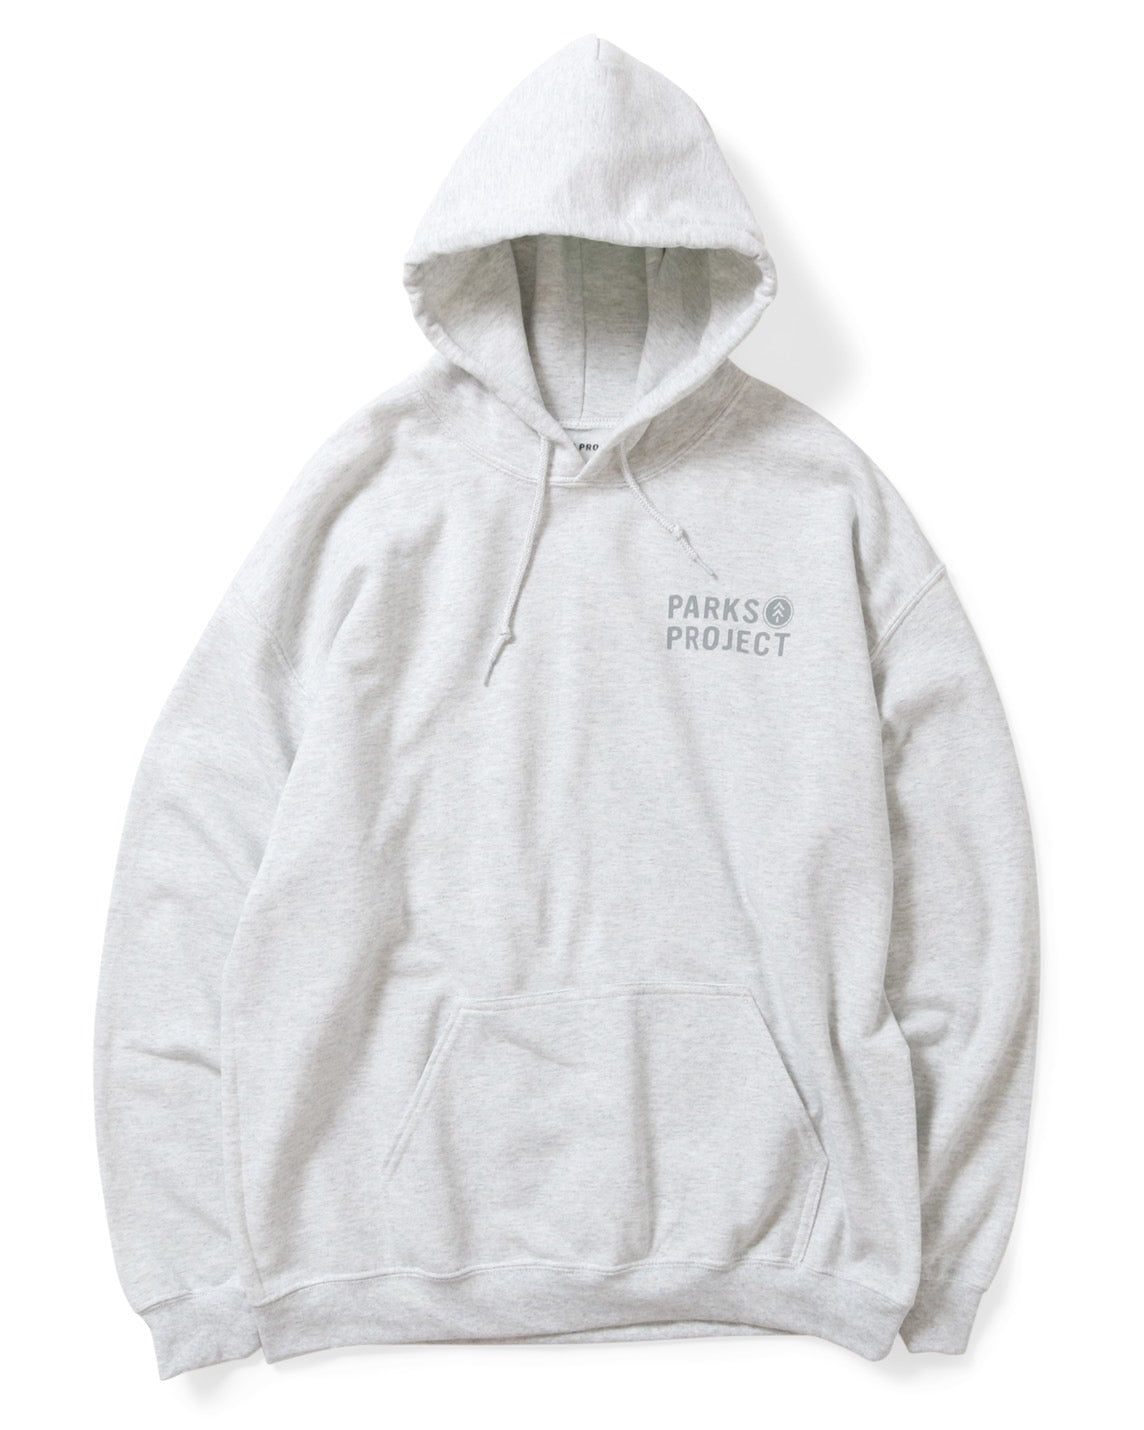 PARKS PROJECT   Leave it better Hoodie